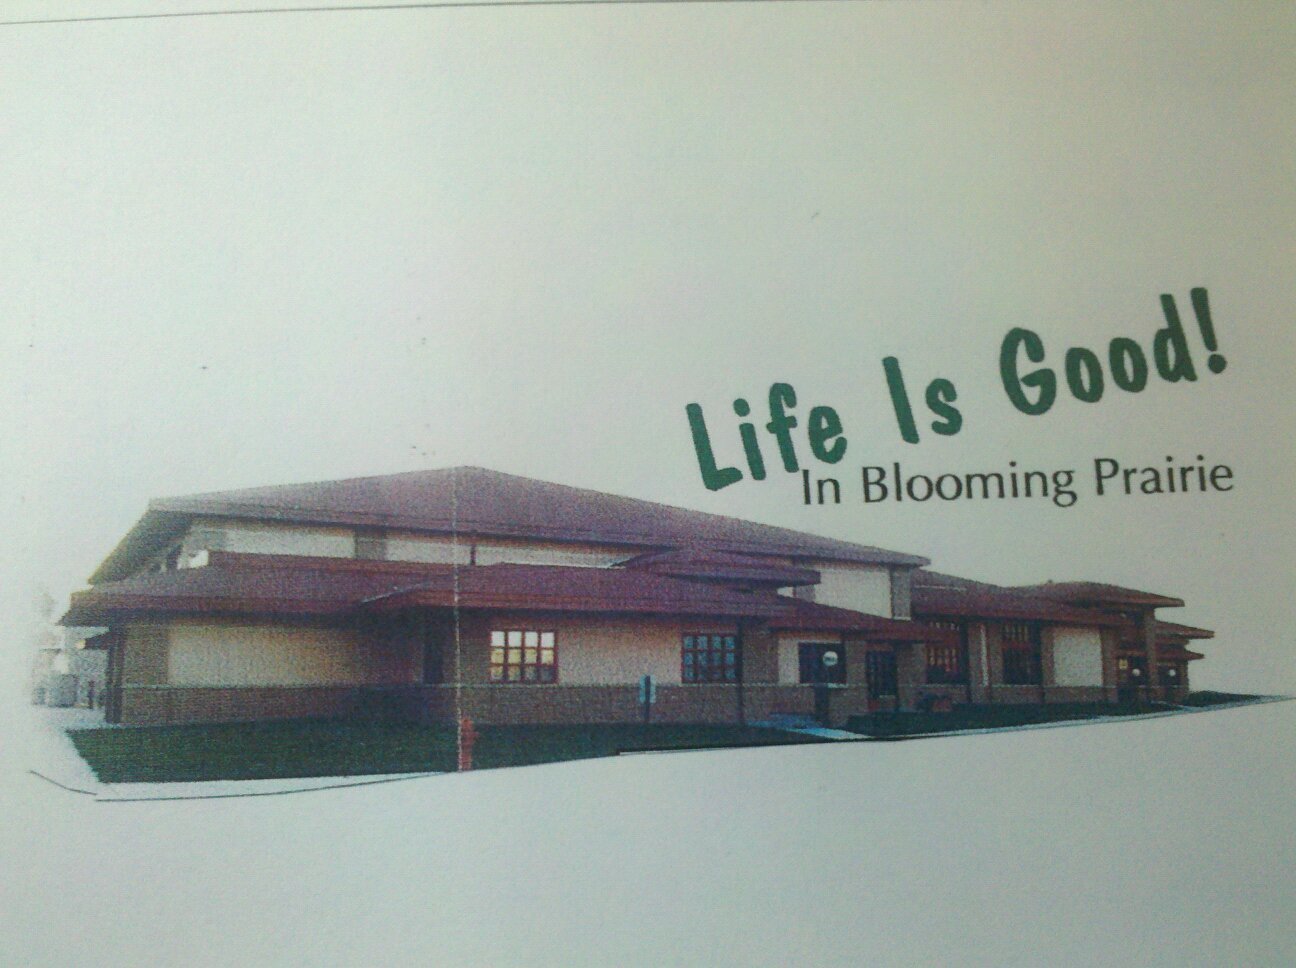 Blooming Prairie Area Chamber of Commerce